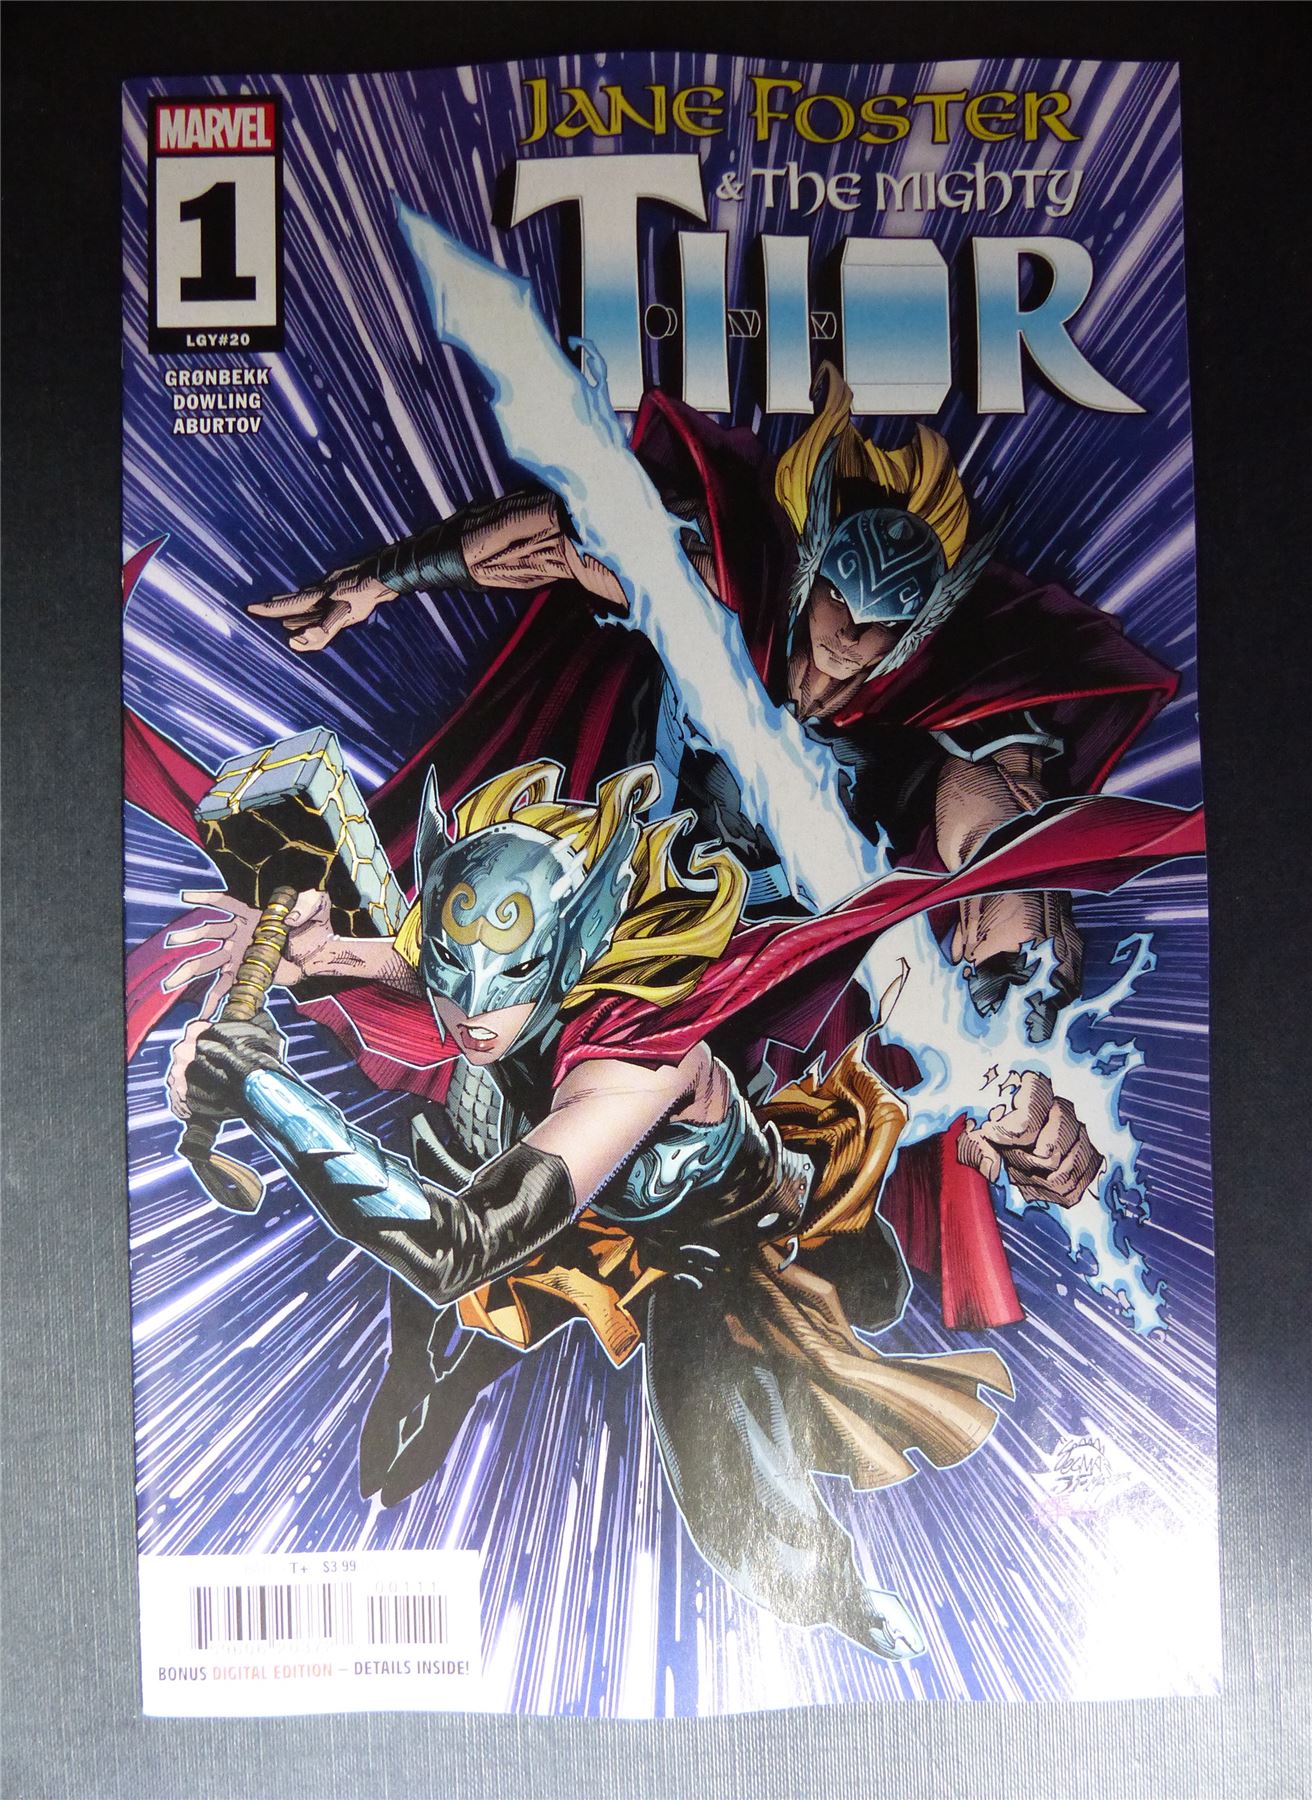 Jane Foster & the Mighty THOR #1 - Aug 2022 - Marvel Comics #33R